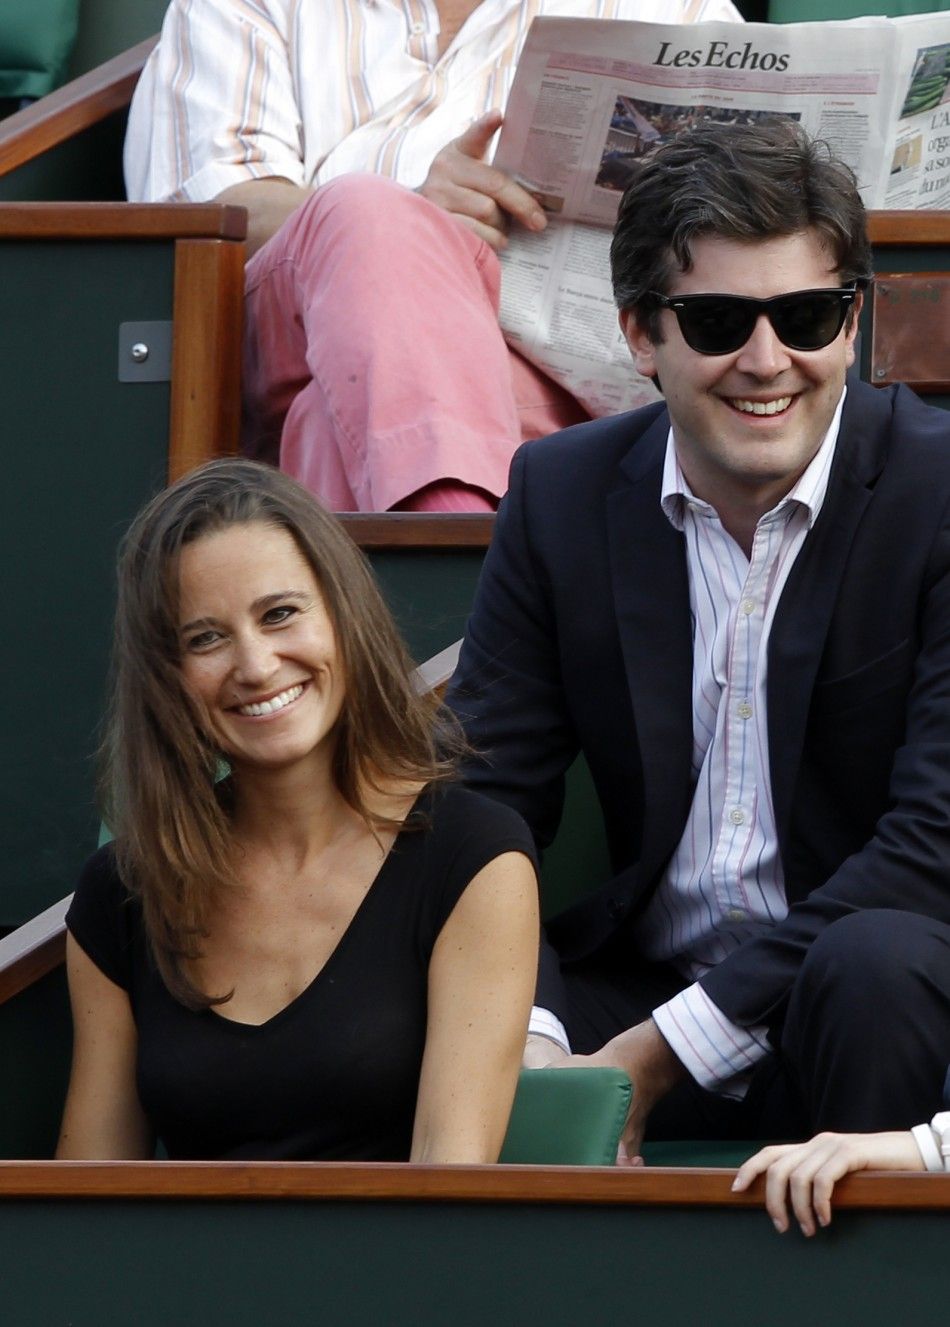 Pippa Middleton watches a match during the French Open tennis tournament at the Roland Garros stadium in Paris